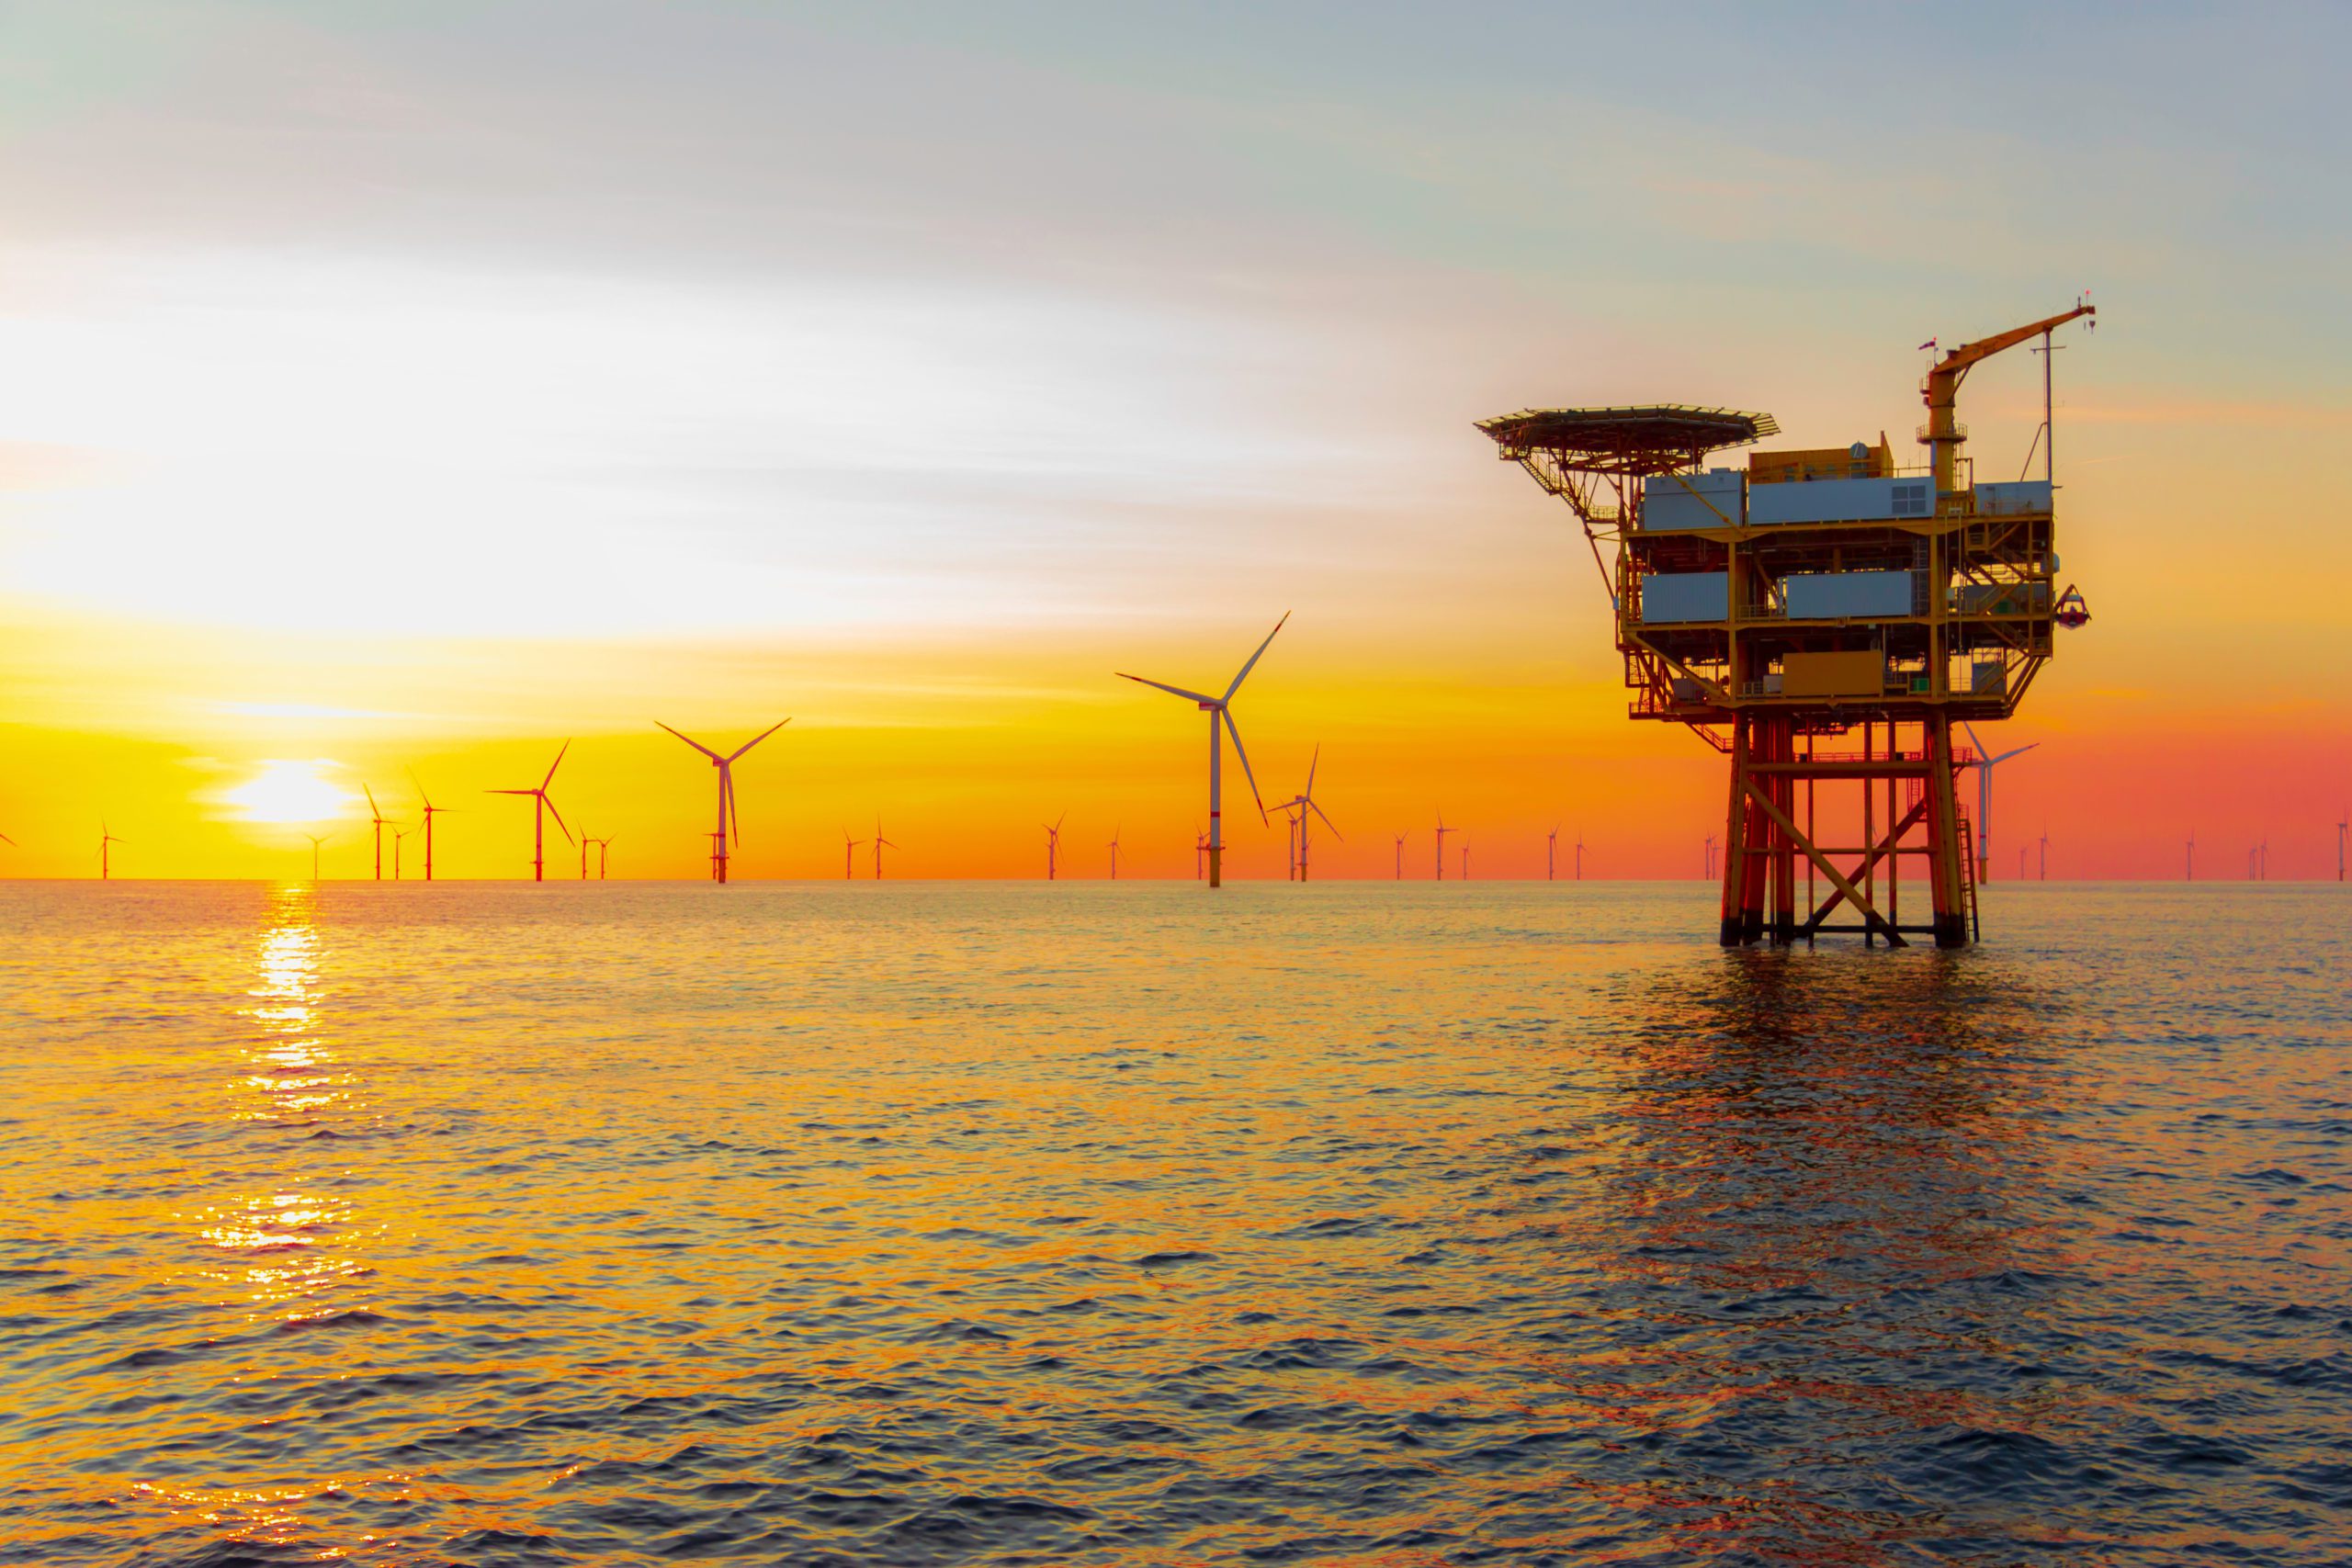 The Rapidly Growing Offshore Wind Industry’s Impact on Worker Safety